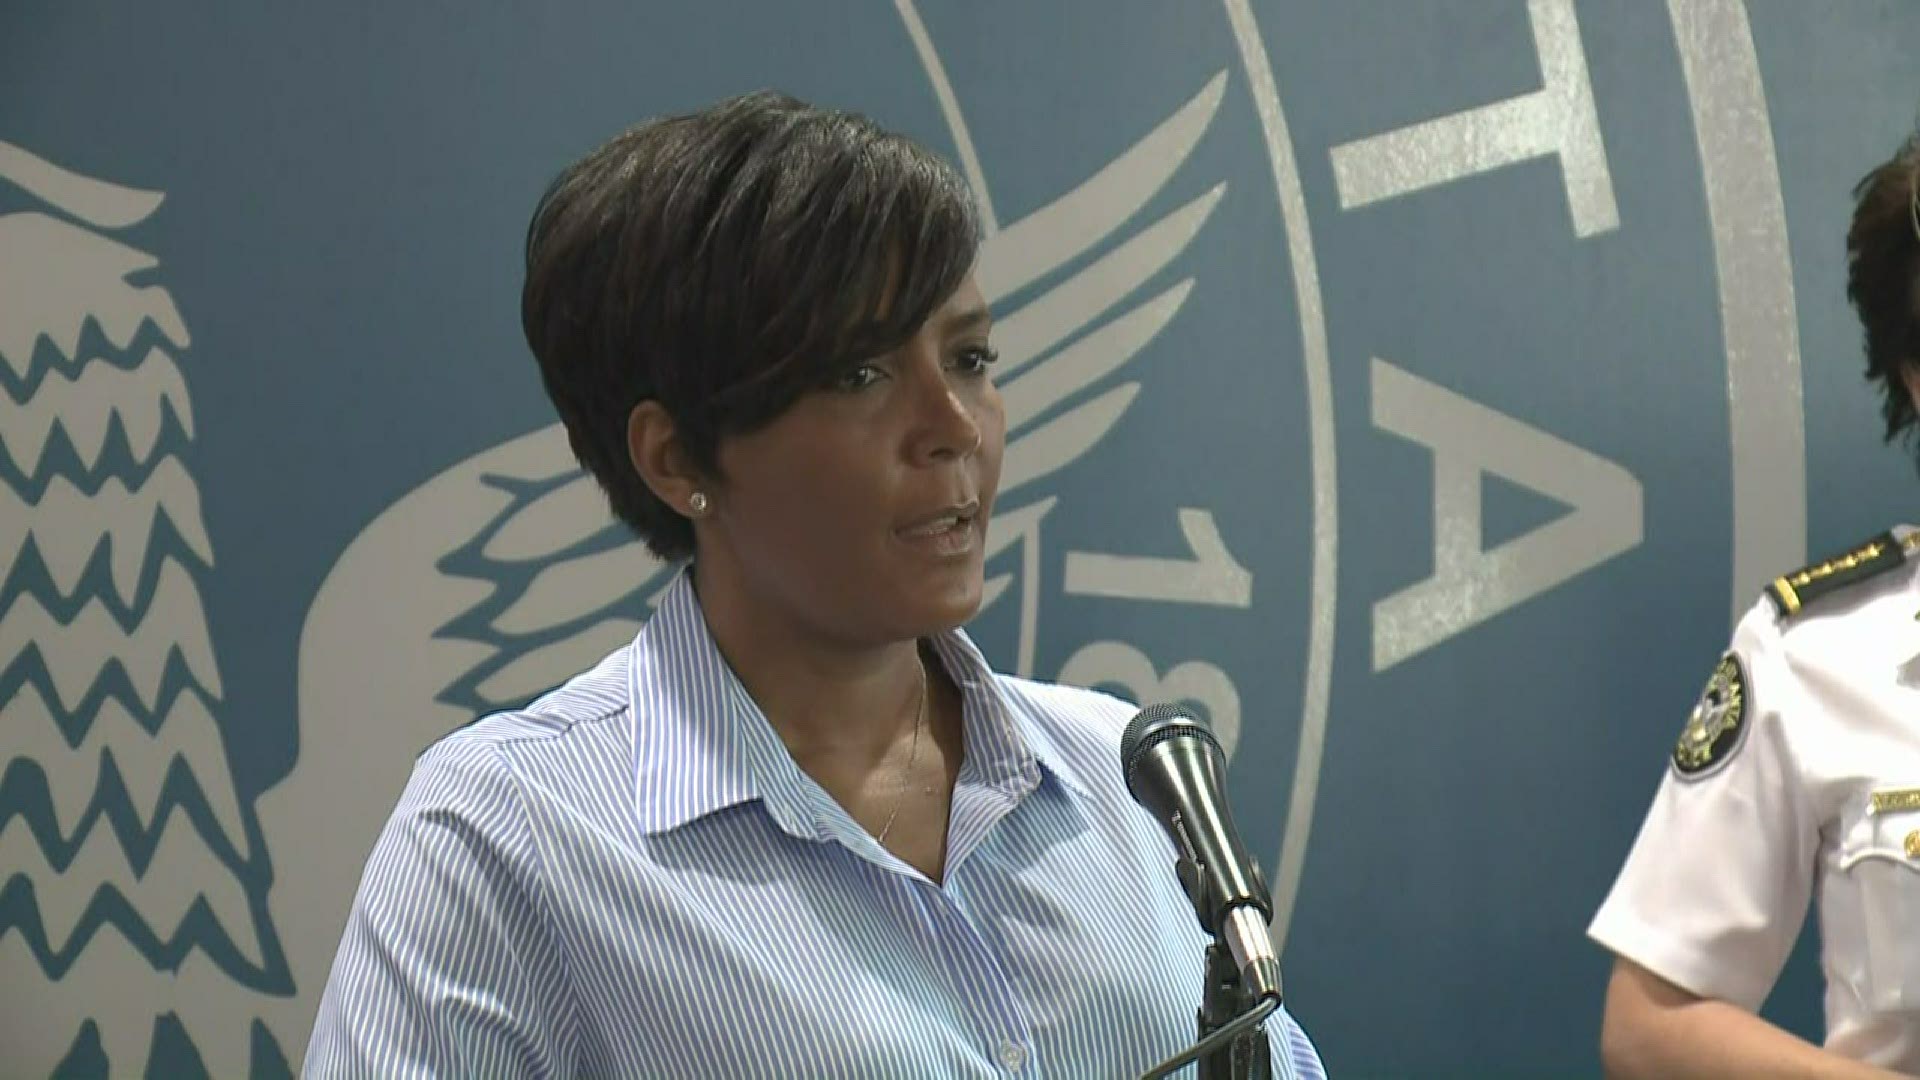 Atlanta Mayor Keisha Lance Bottoms talks about the response to her speech and her reaction to people cleaning up the damage Saturday morning.